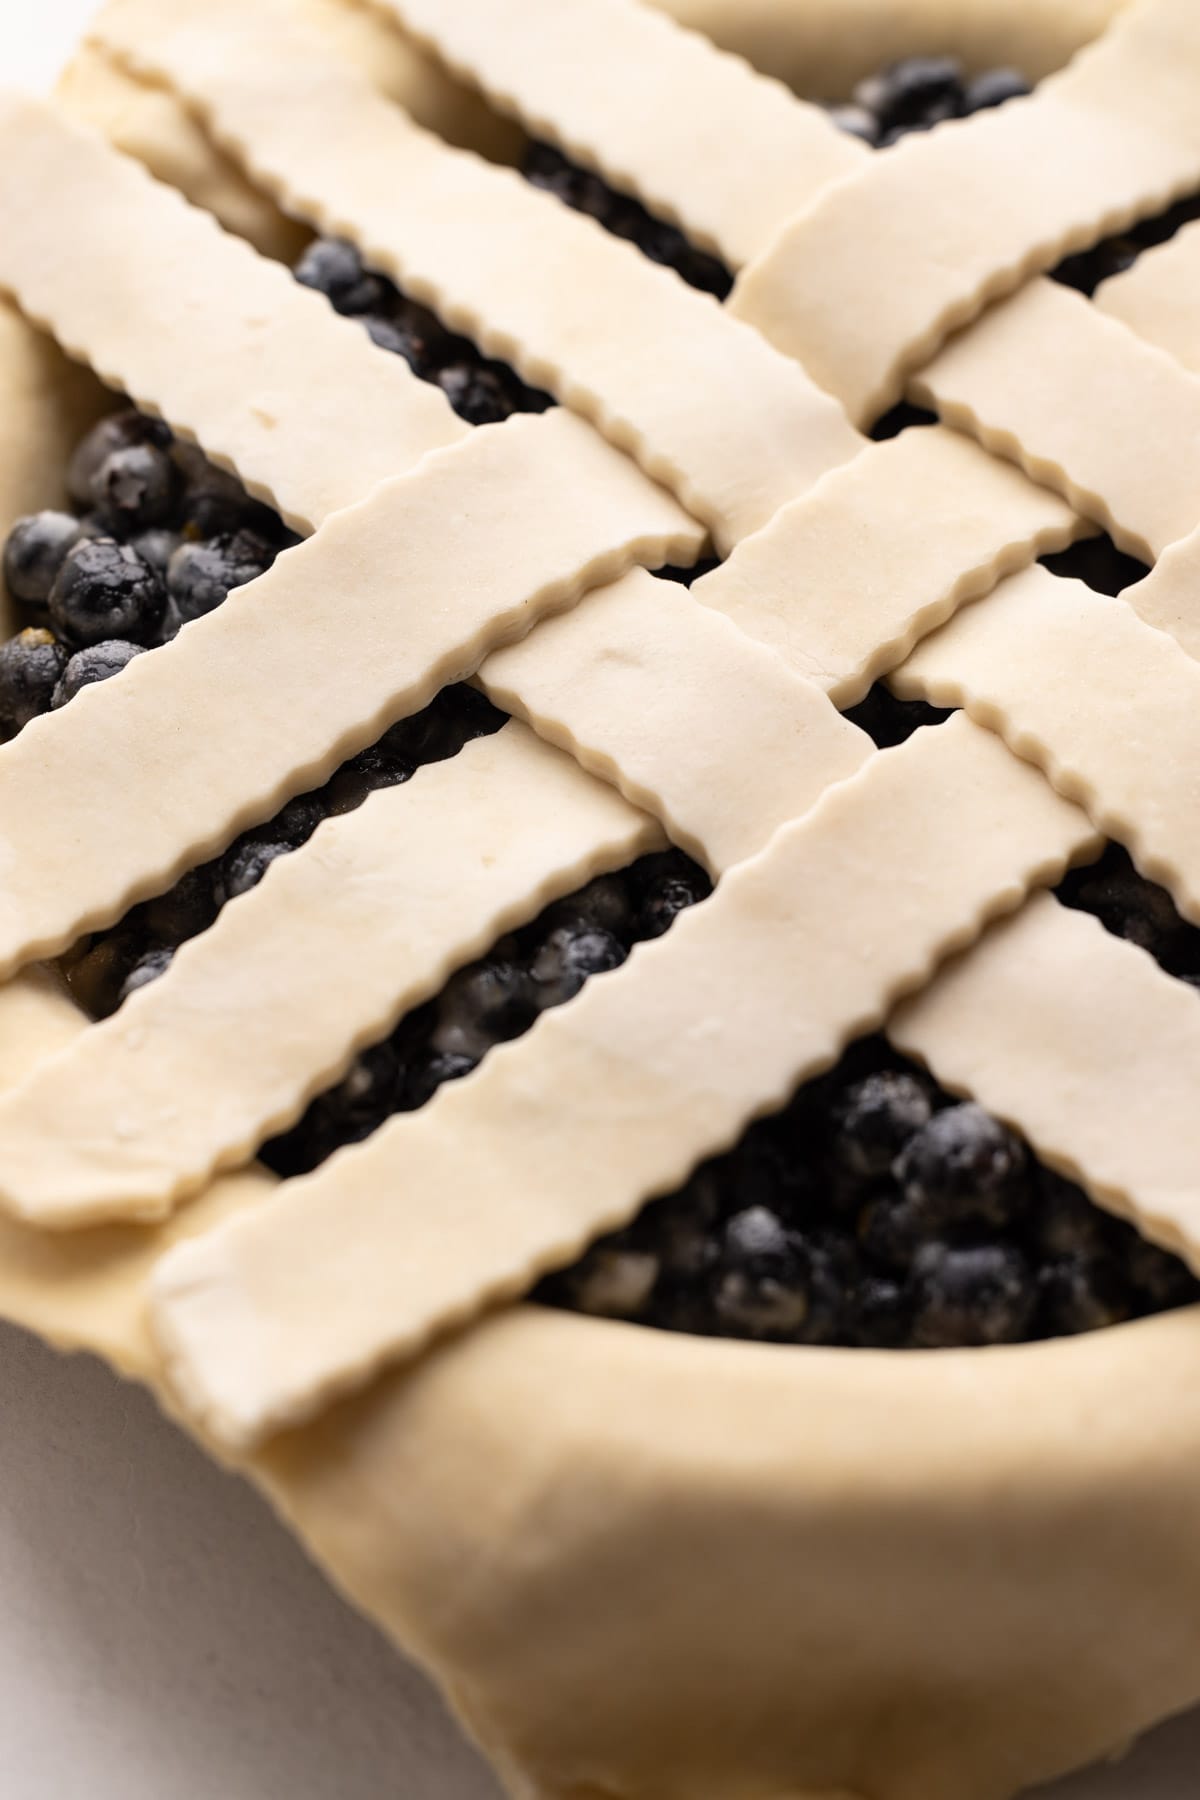 A blueberry pie with a lattice